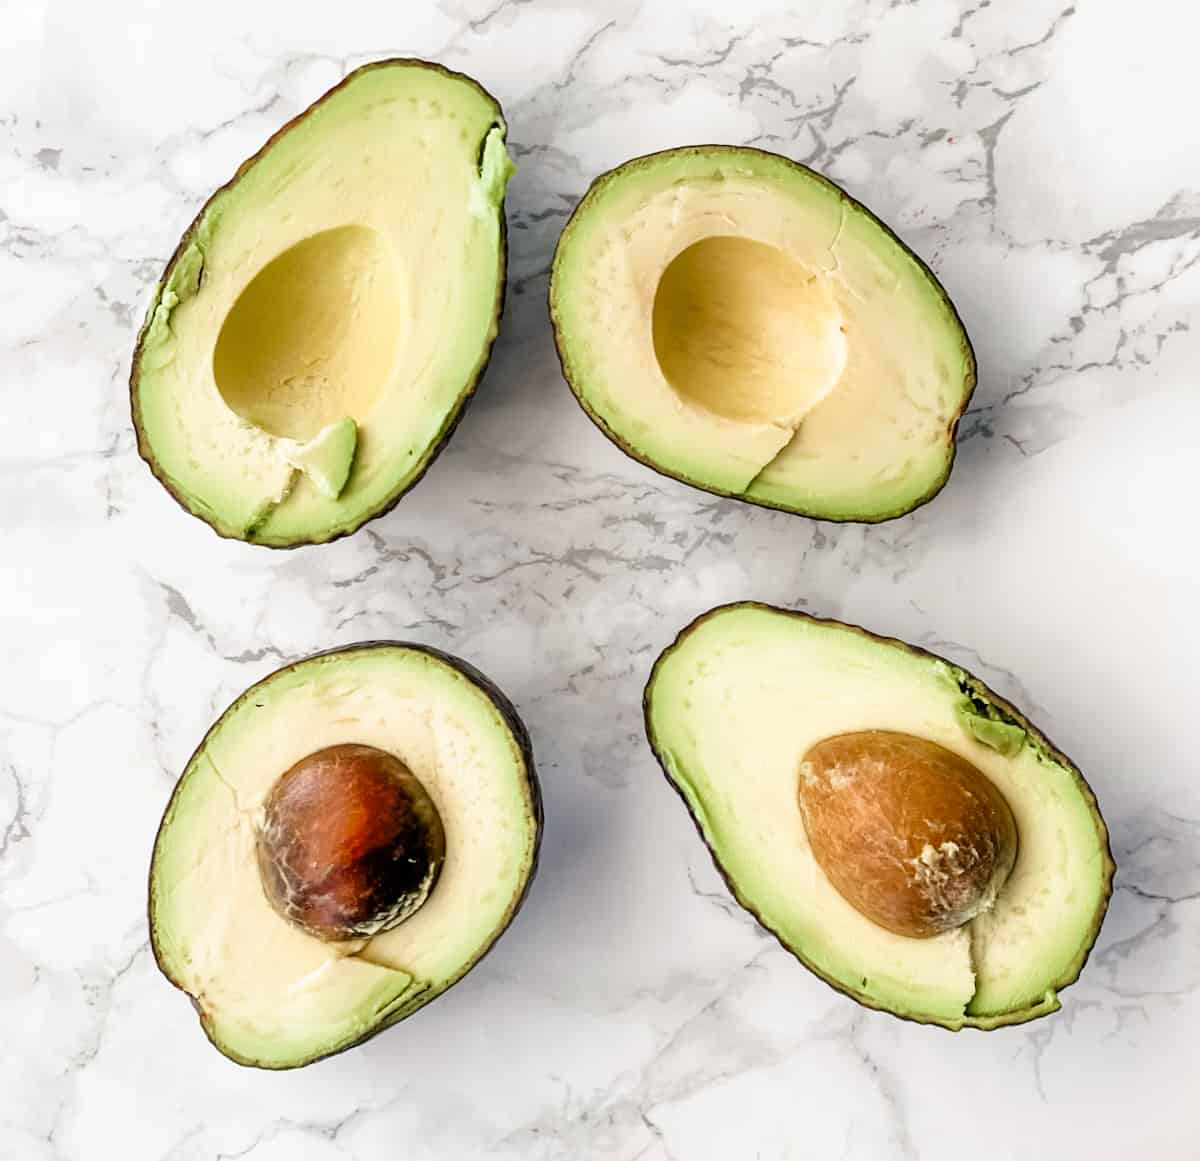 avocados cut in half with flesh facing up.